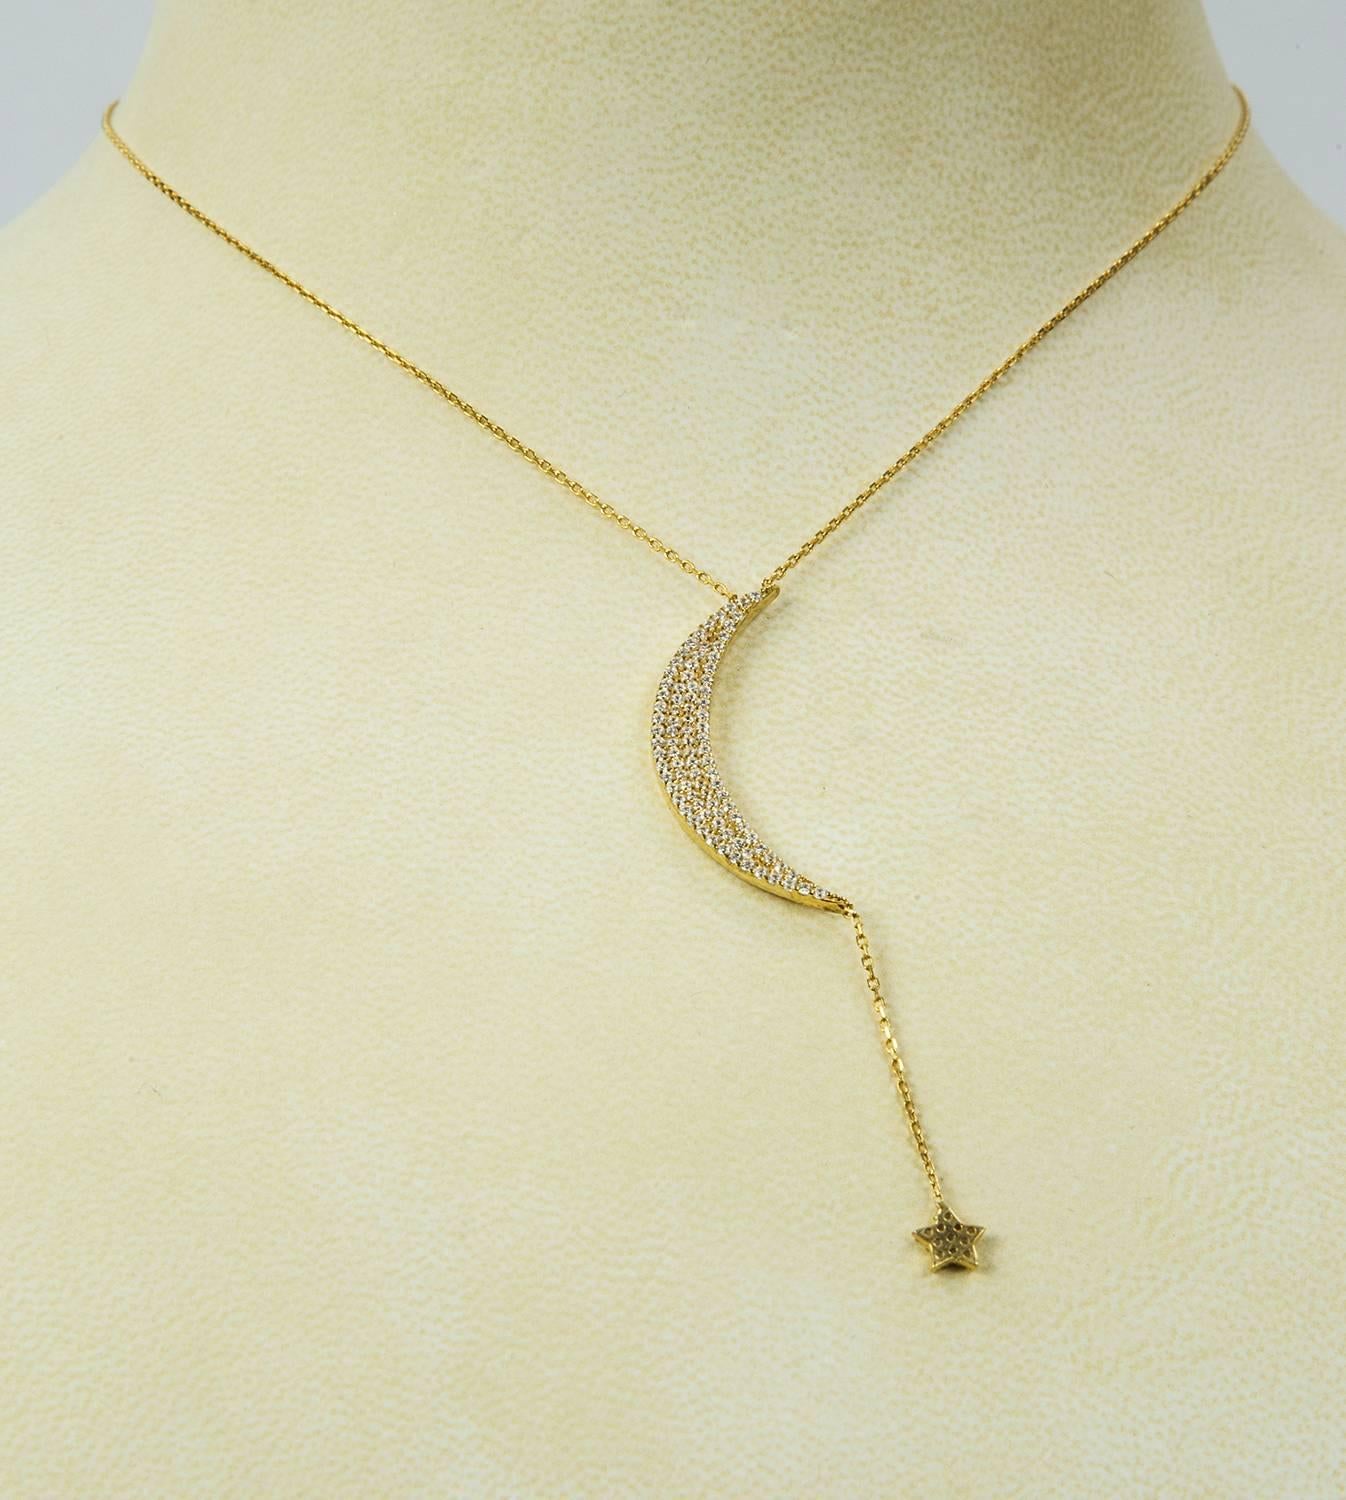 Women's Moon and Star Gilt Sterling Silver Pendant Necklace